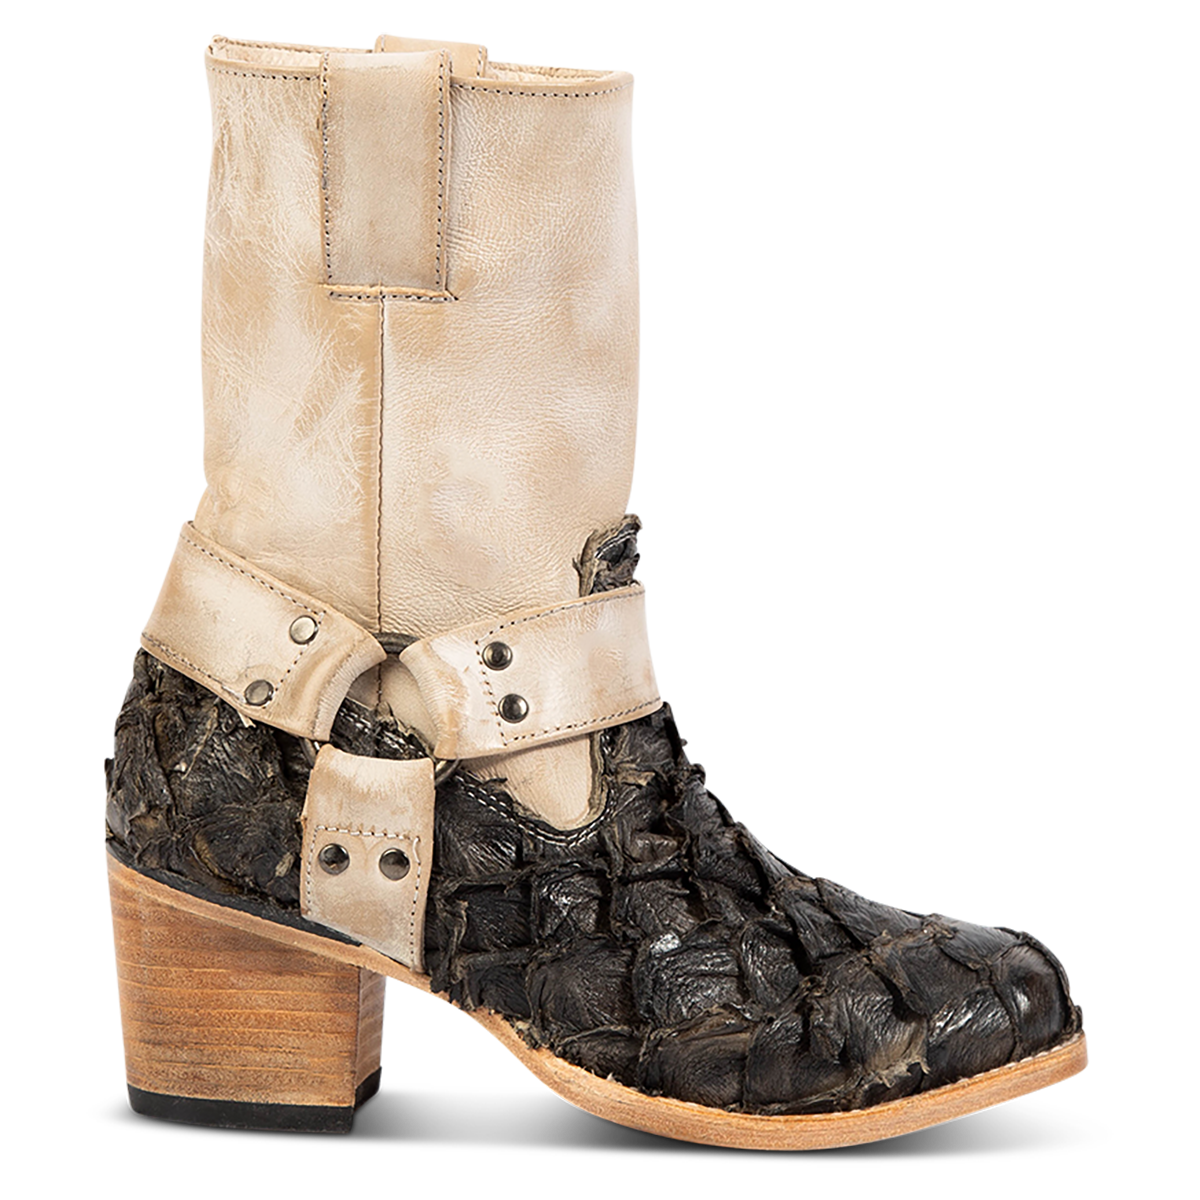 FREEBIRD women's Darcy beige multi fish leather boot with a studded ankle harness, leather pull straps, an inside zip closure and a square toe